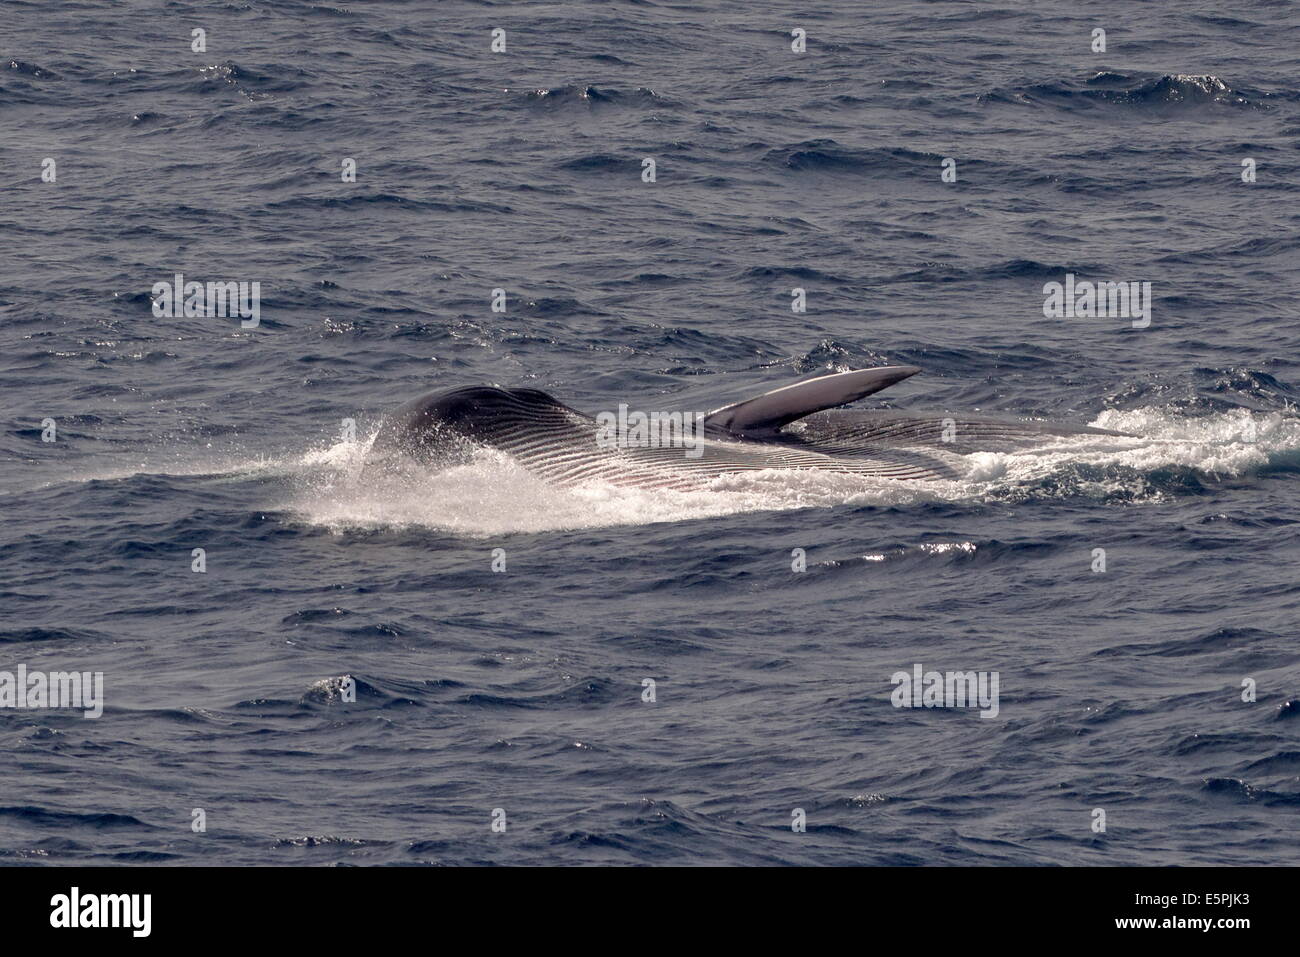 Lunge-feeding fin whale (Balaenoptera physalus) showing distended throat grooves, Northeast Atlantic, off Morocco, North Africa Stock Photo